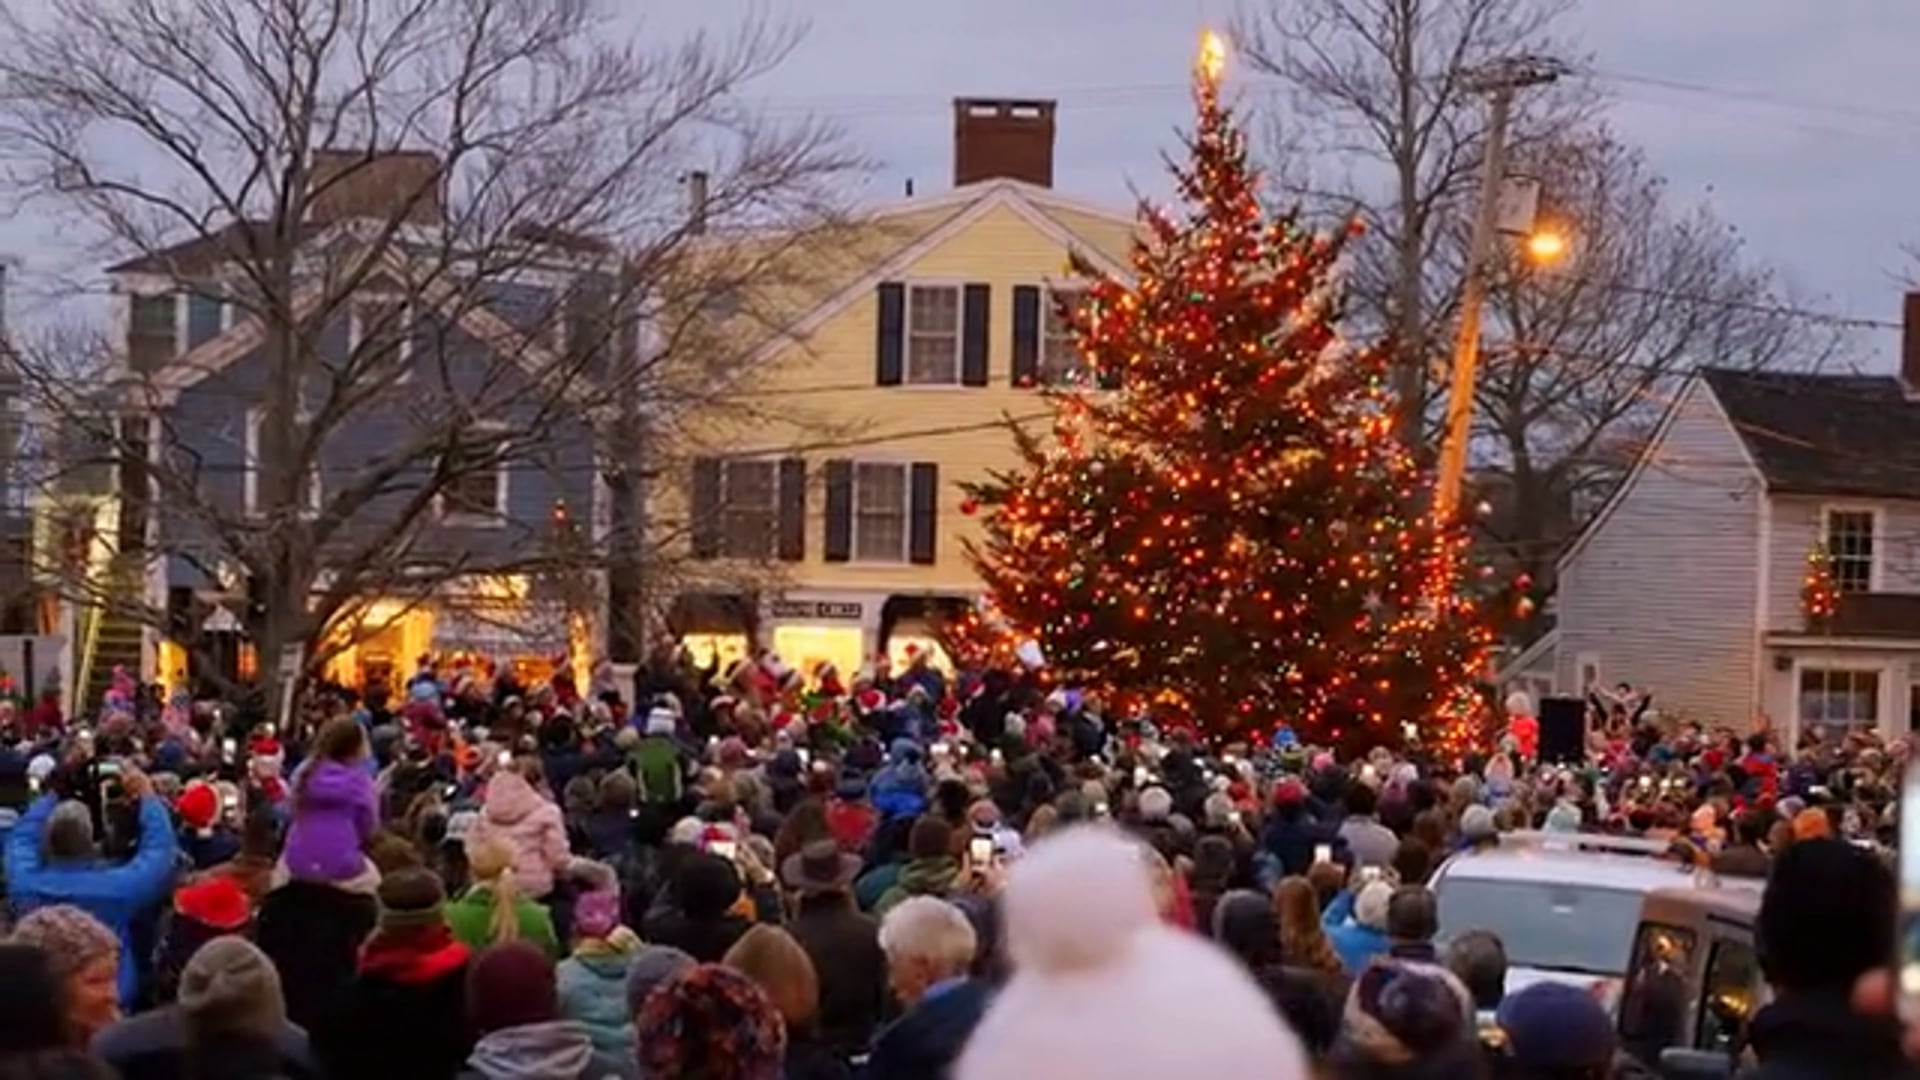 The Tree by the Sea: Christmas in Rockport